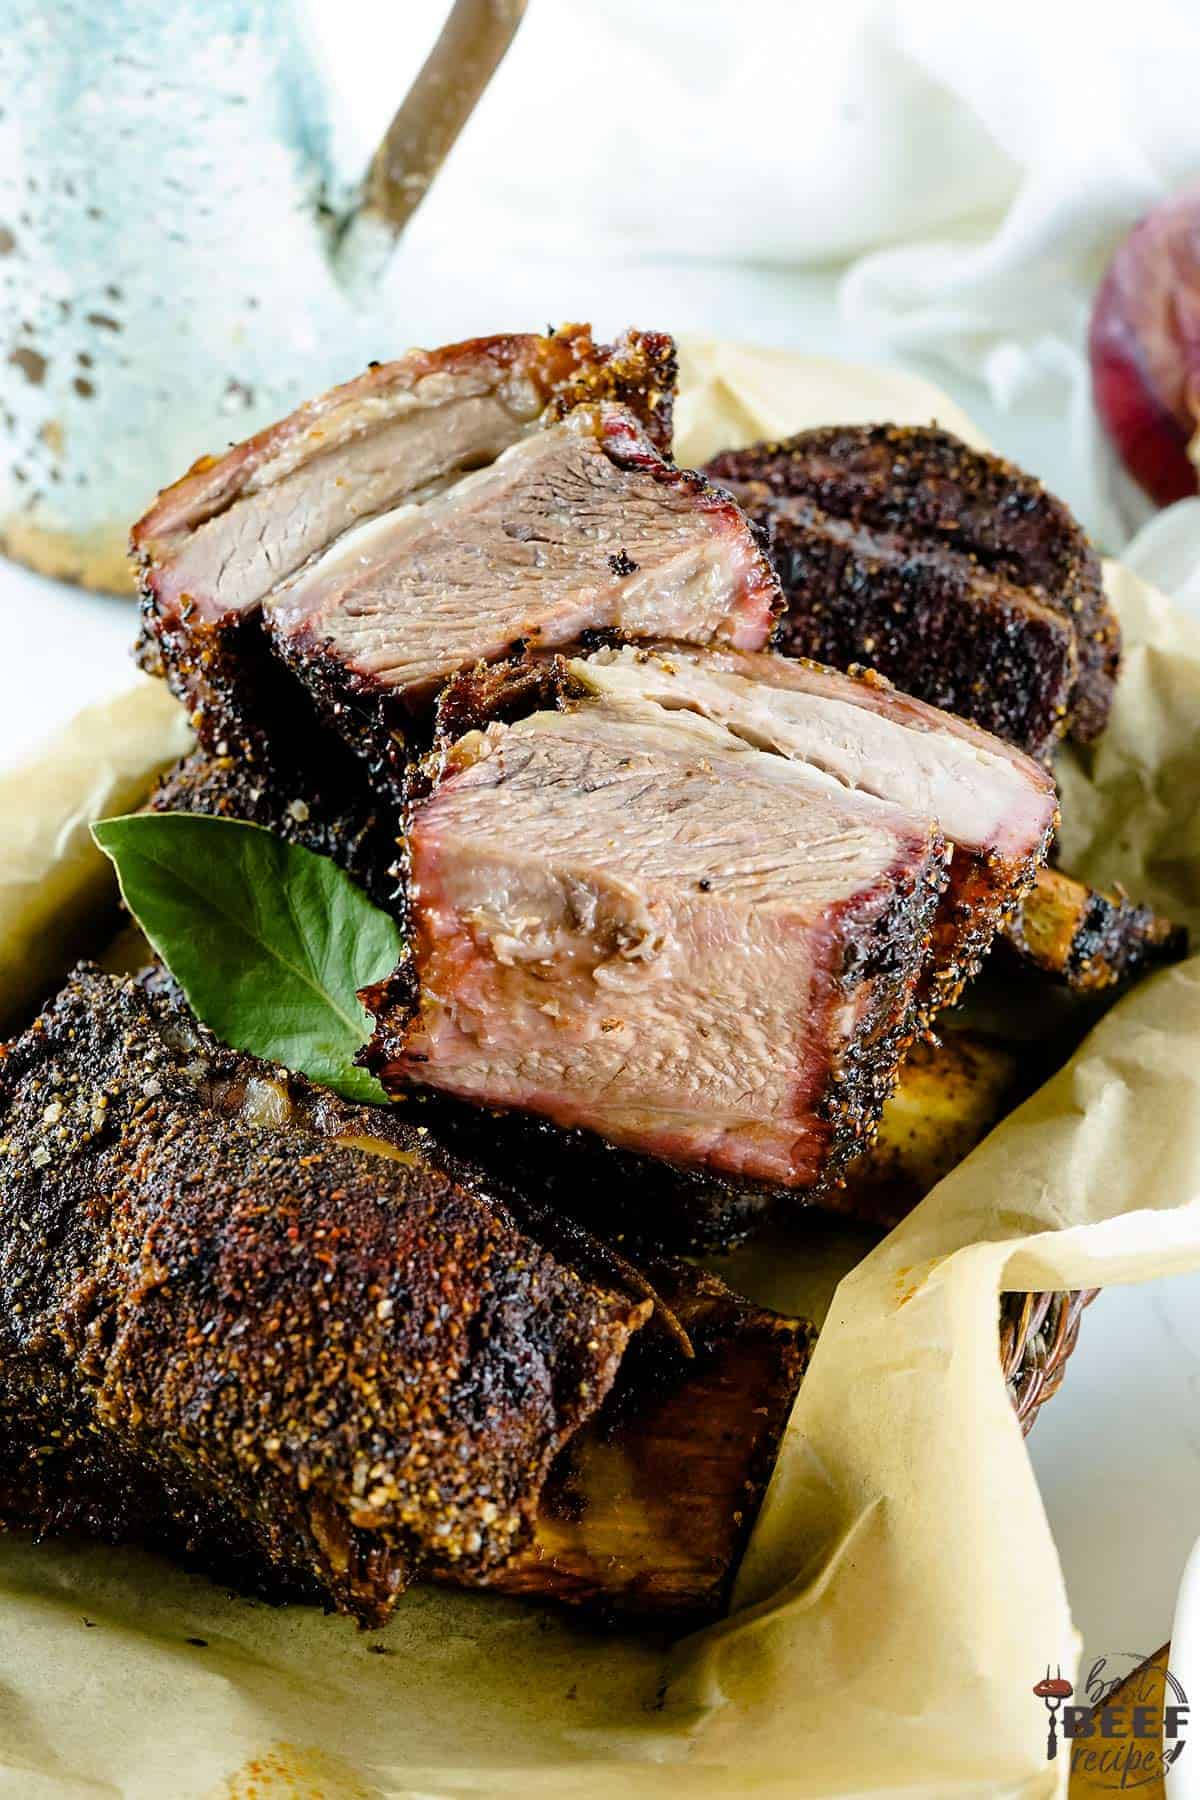 Smoked beef short ribs sliced on parchment paper in a basket